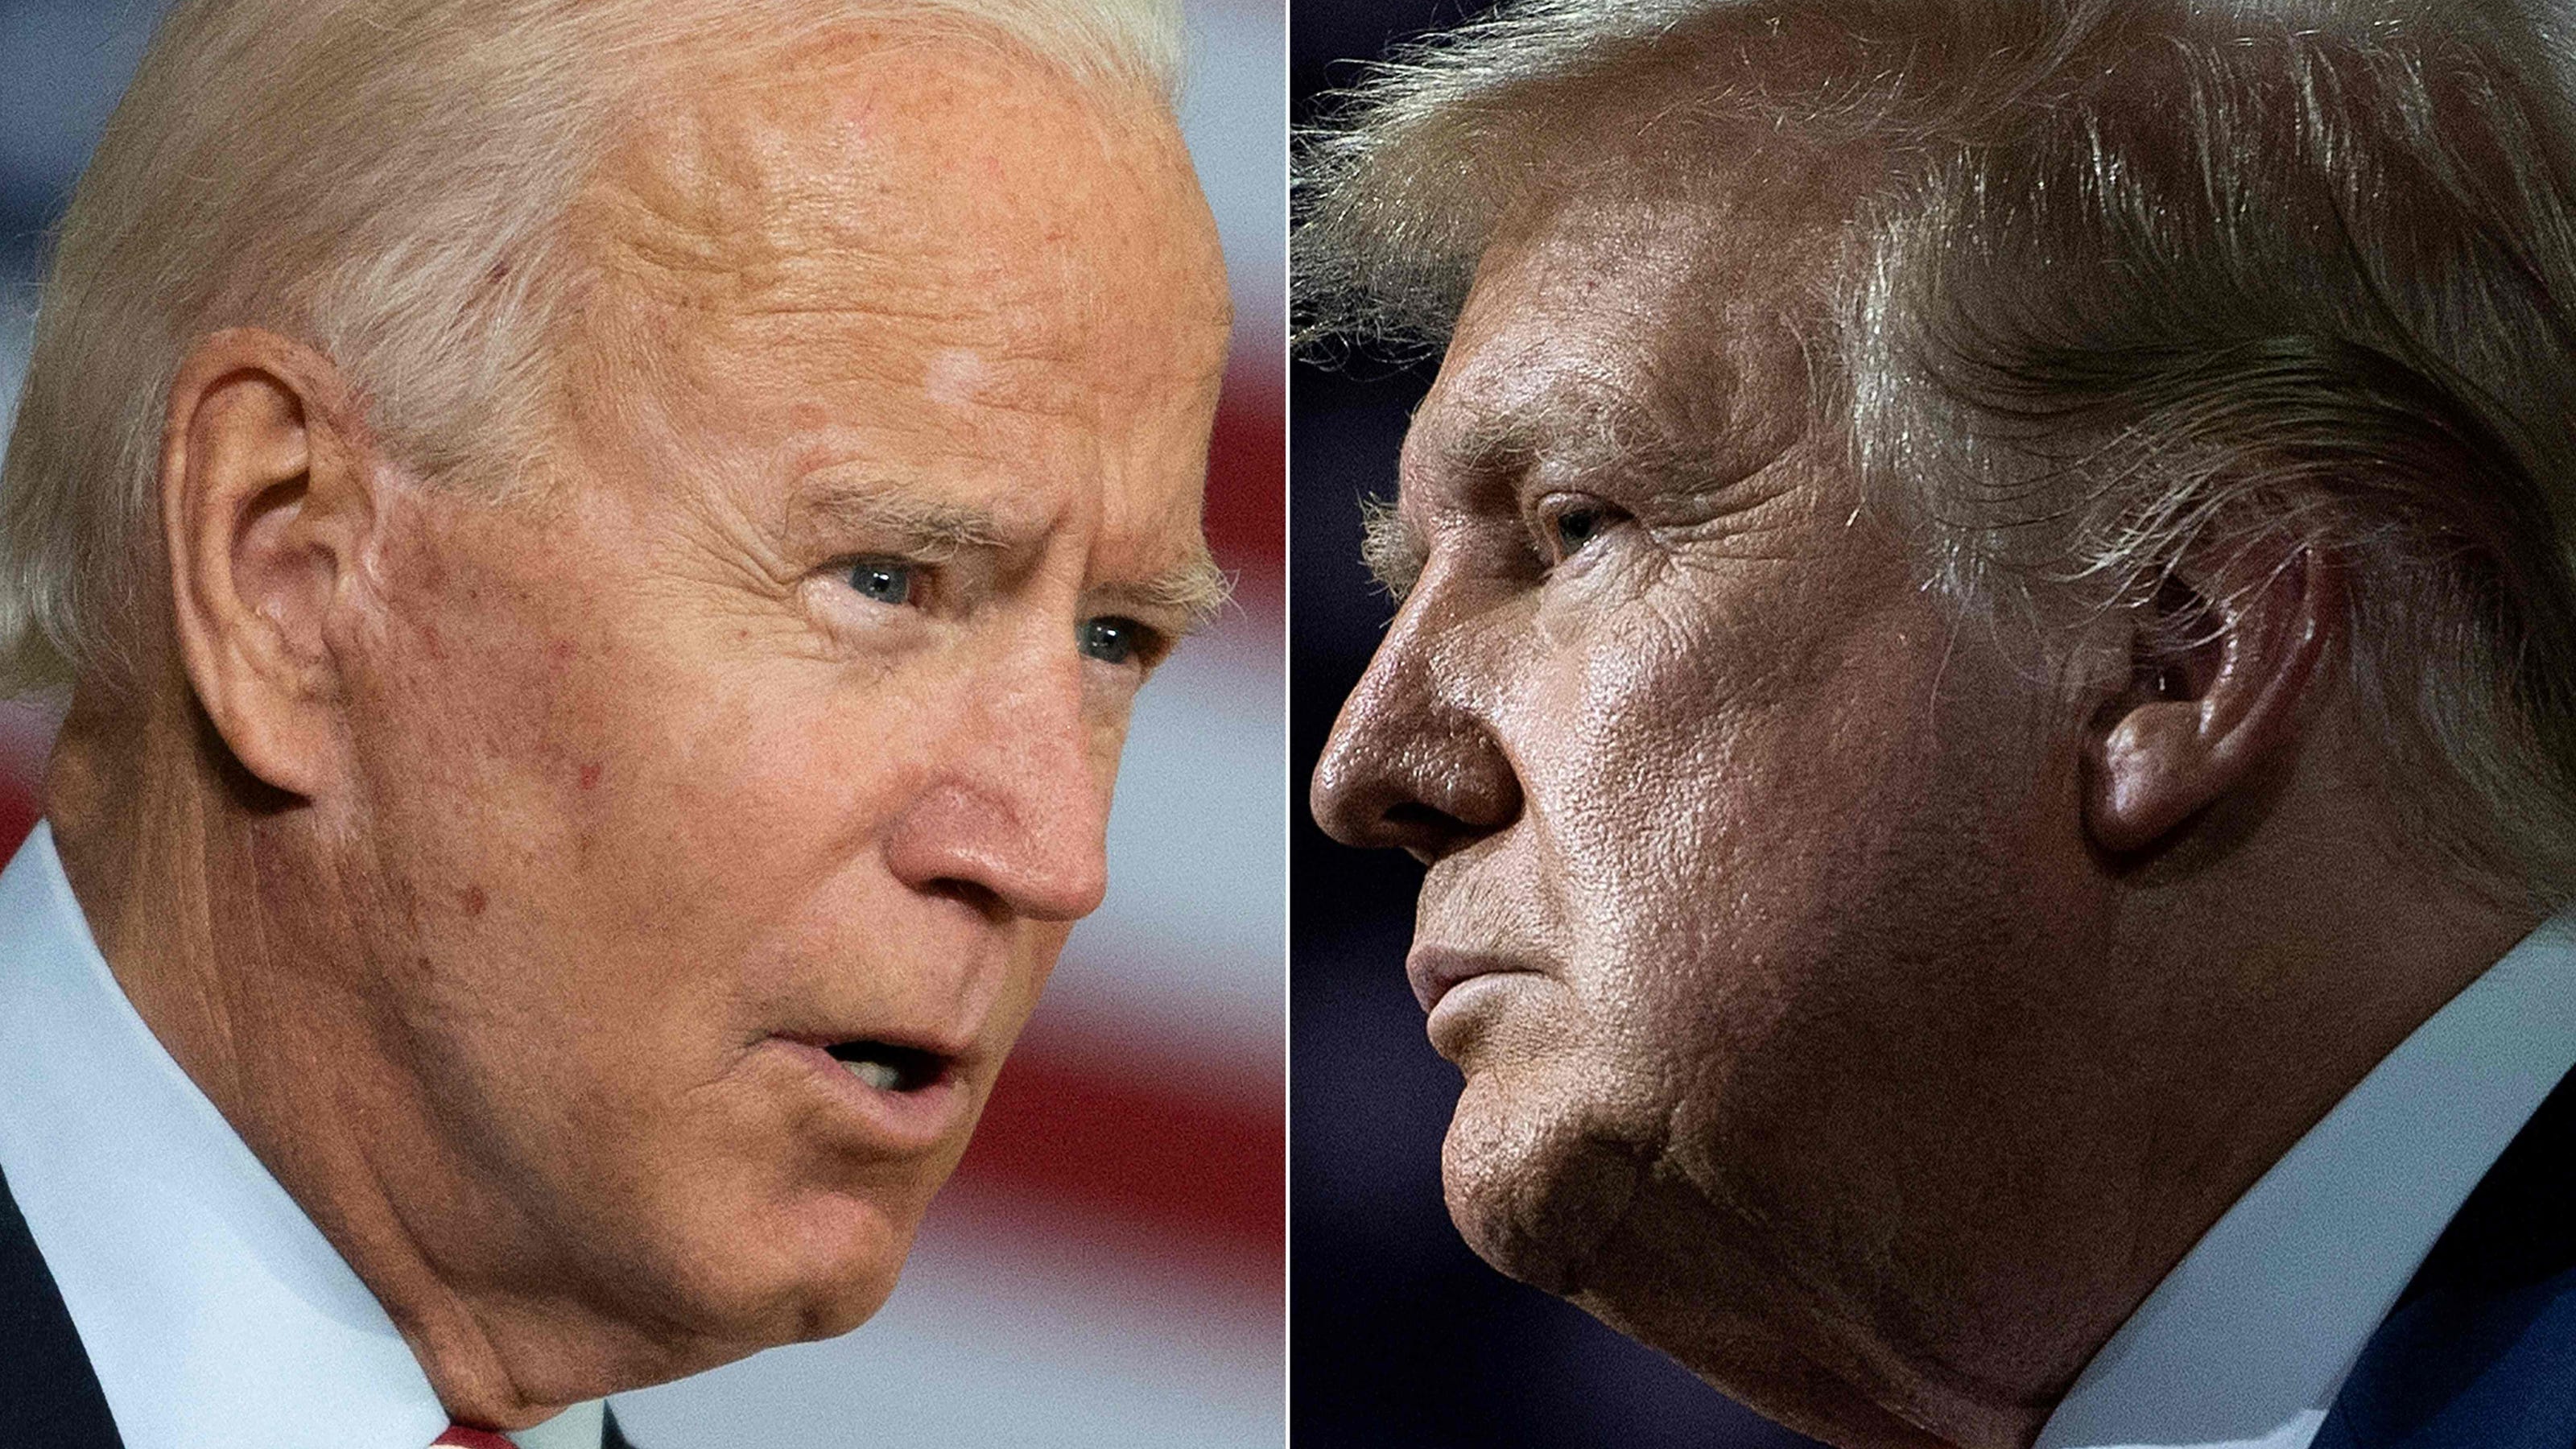 Biden gains on Trump, leads most swing states in this week's polls